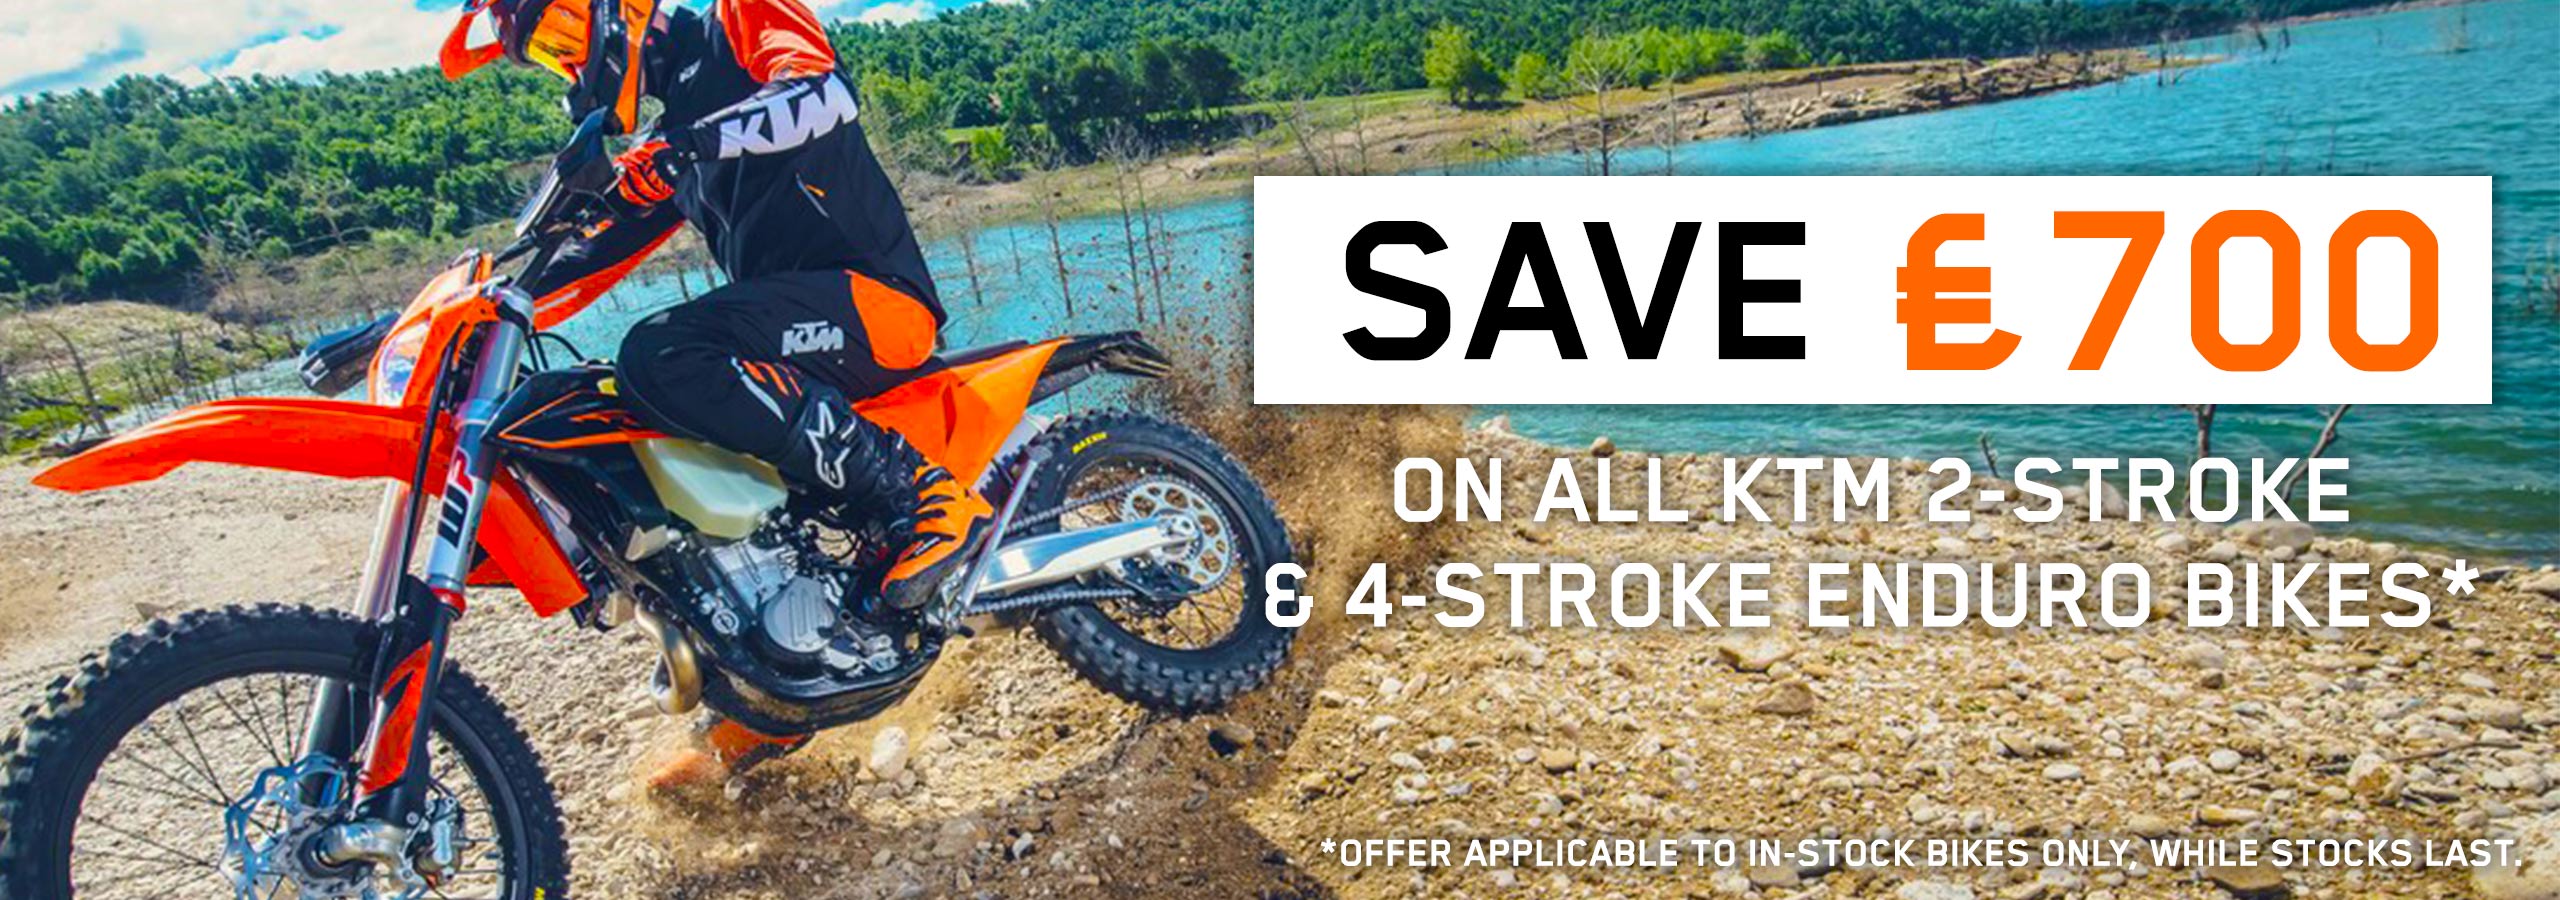 Save £700 with this new KTM Enduro bike offer